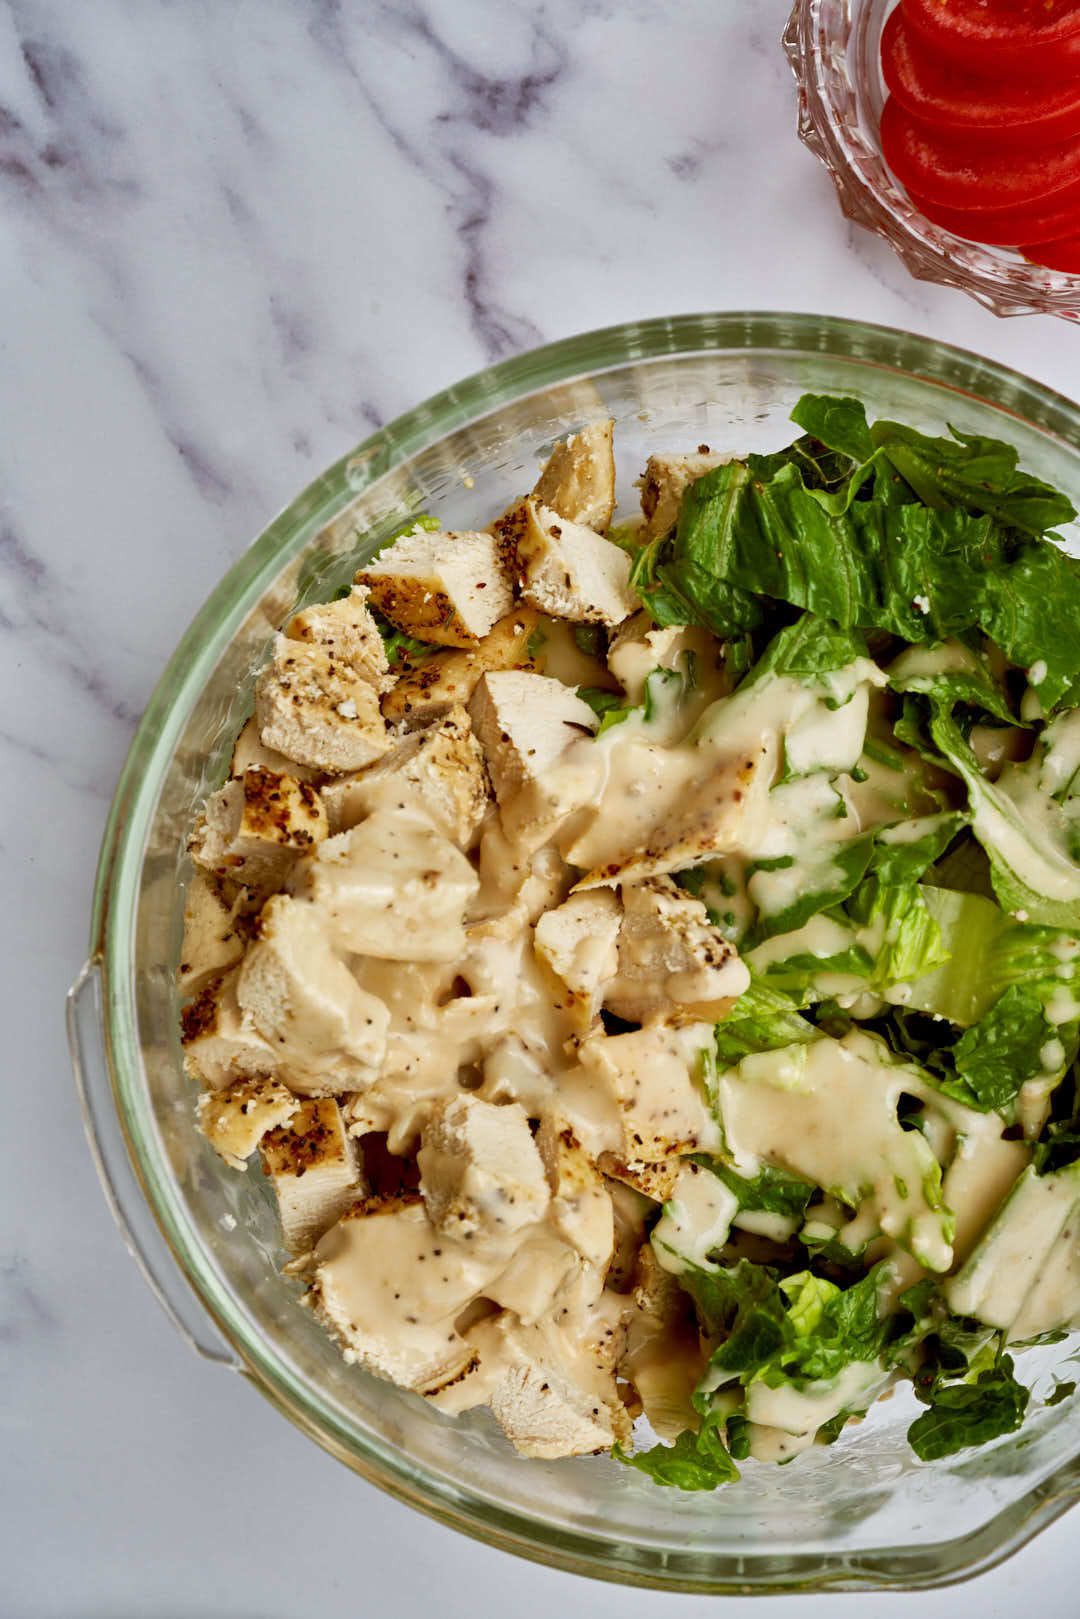 Diced chicken, lettuce, and beige dressing in a large glass bowl.